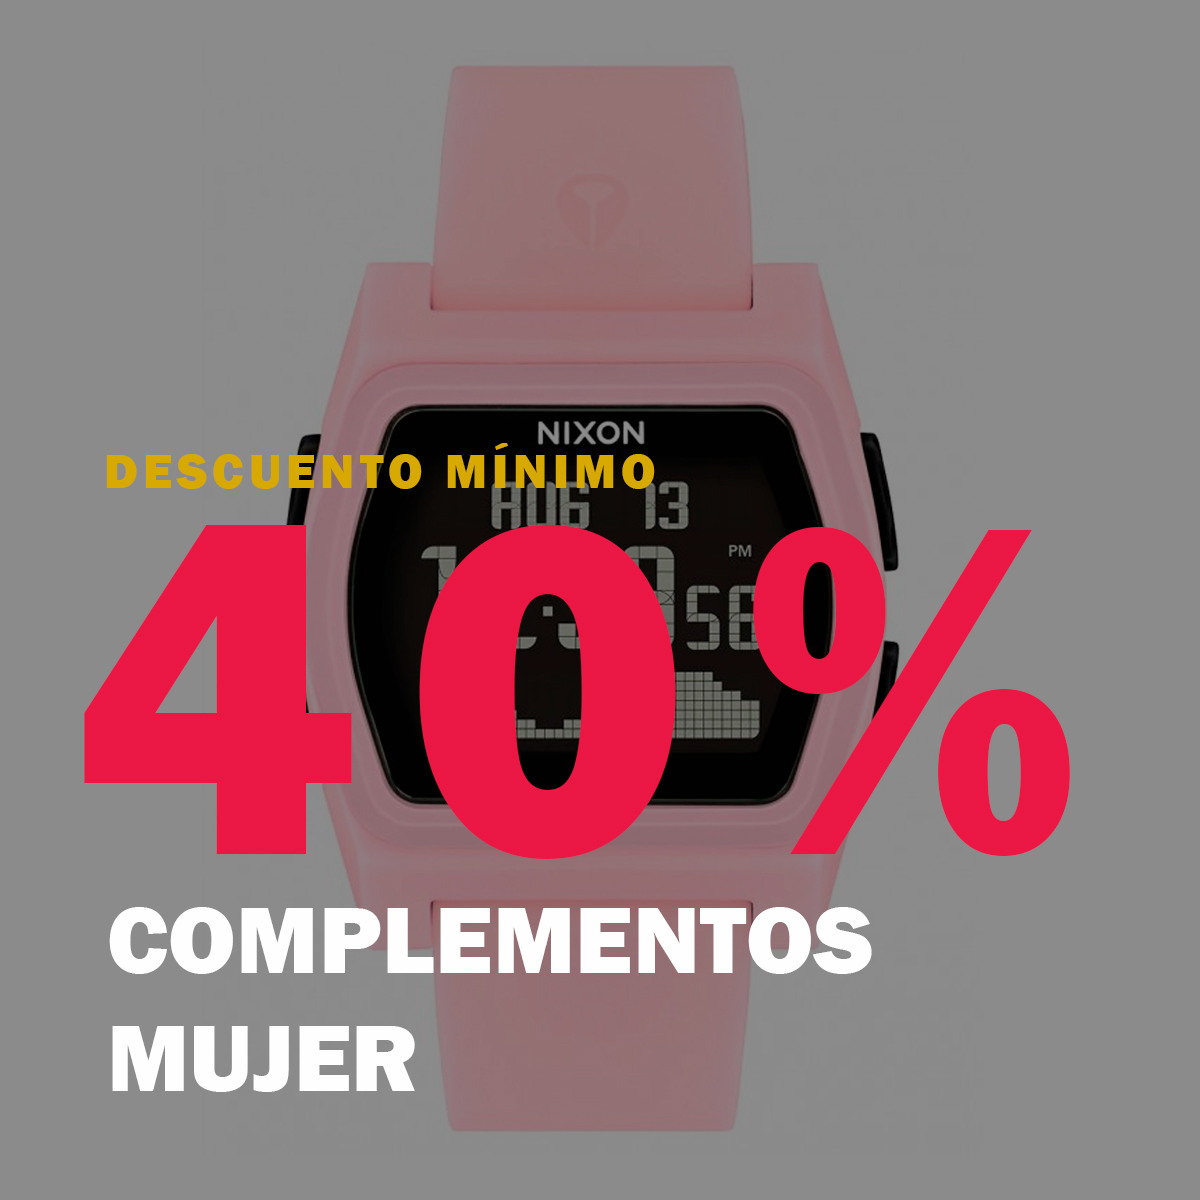 COMPLEMENTOS MUJER